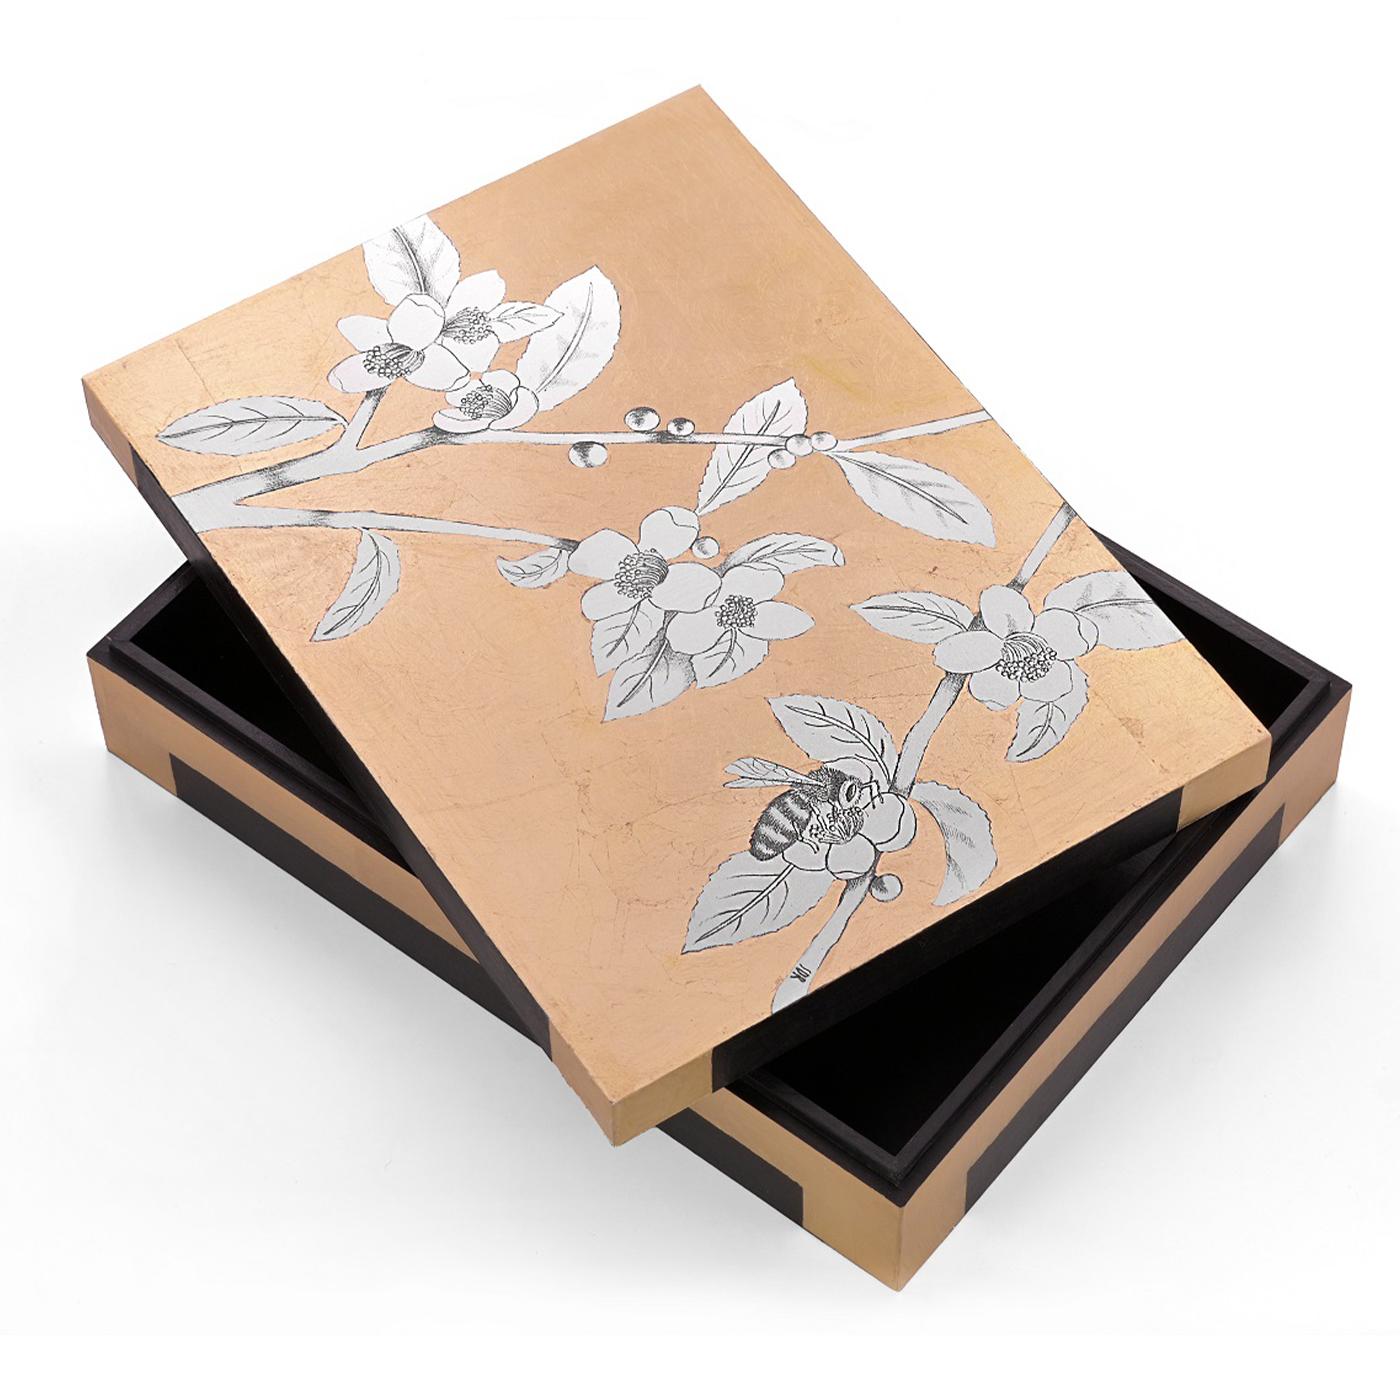 Hand-made box with gold leaf application on graphite drawing. A bee flies from tea flower to tea flower in a gold-sprinkled sky, made by Stefania with her masterful brushstrokes. Entirely decorated by hand with gold leaf on the print of an original